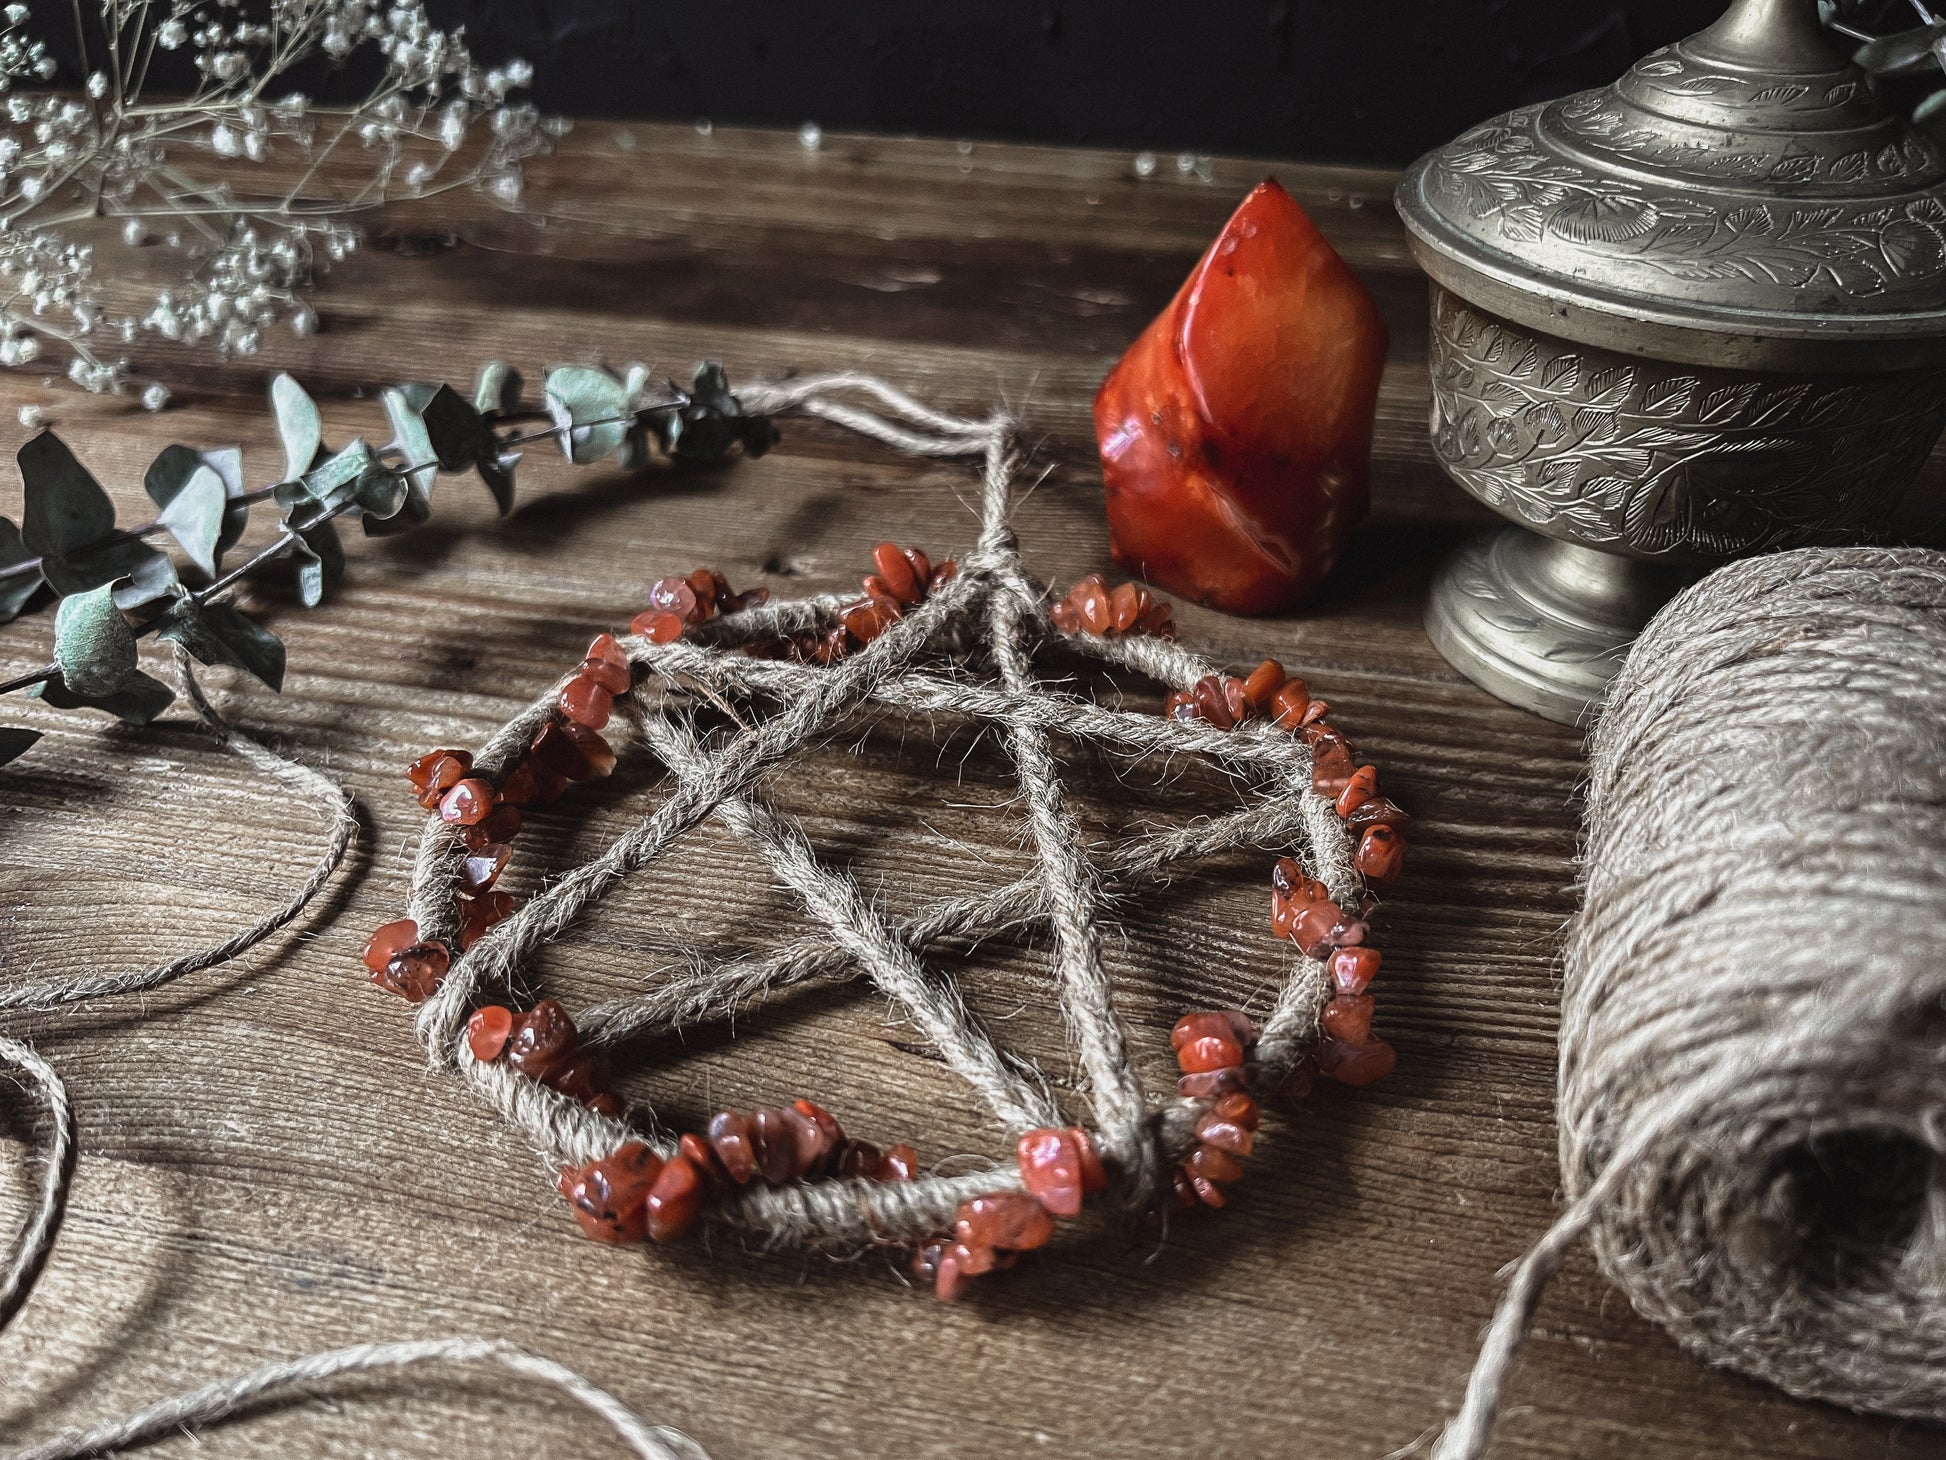 handcrafted Red Carnelian Crystal Pentacle Wall Hanging for your witch altar, sacred space or home decor. 